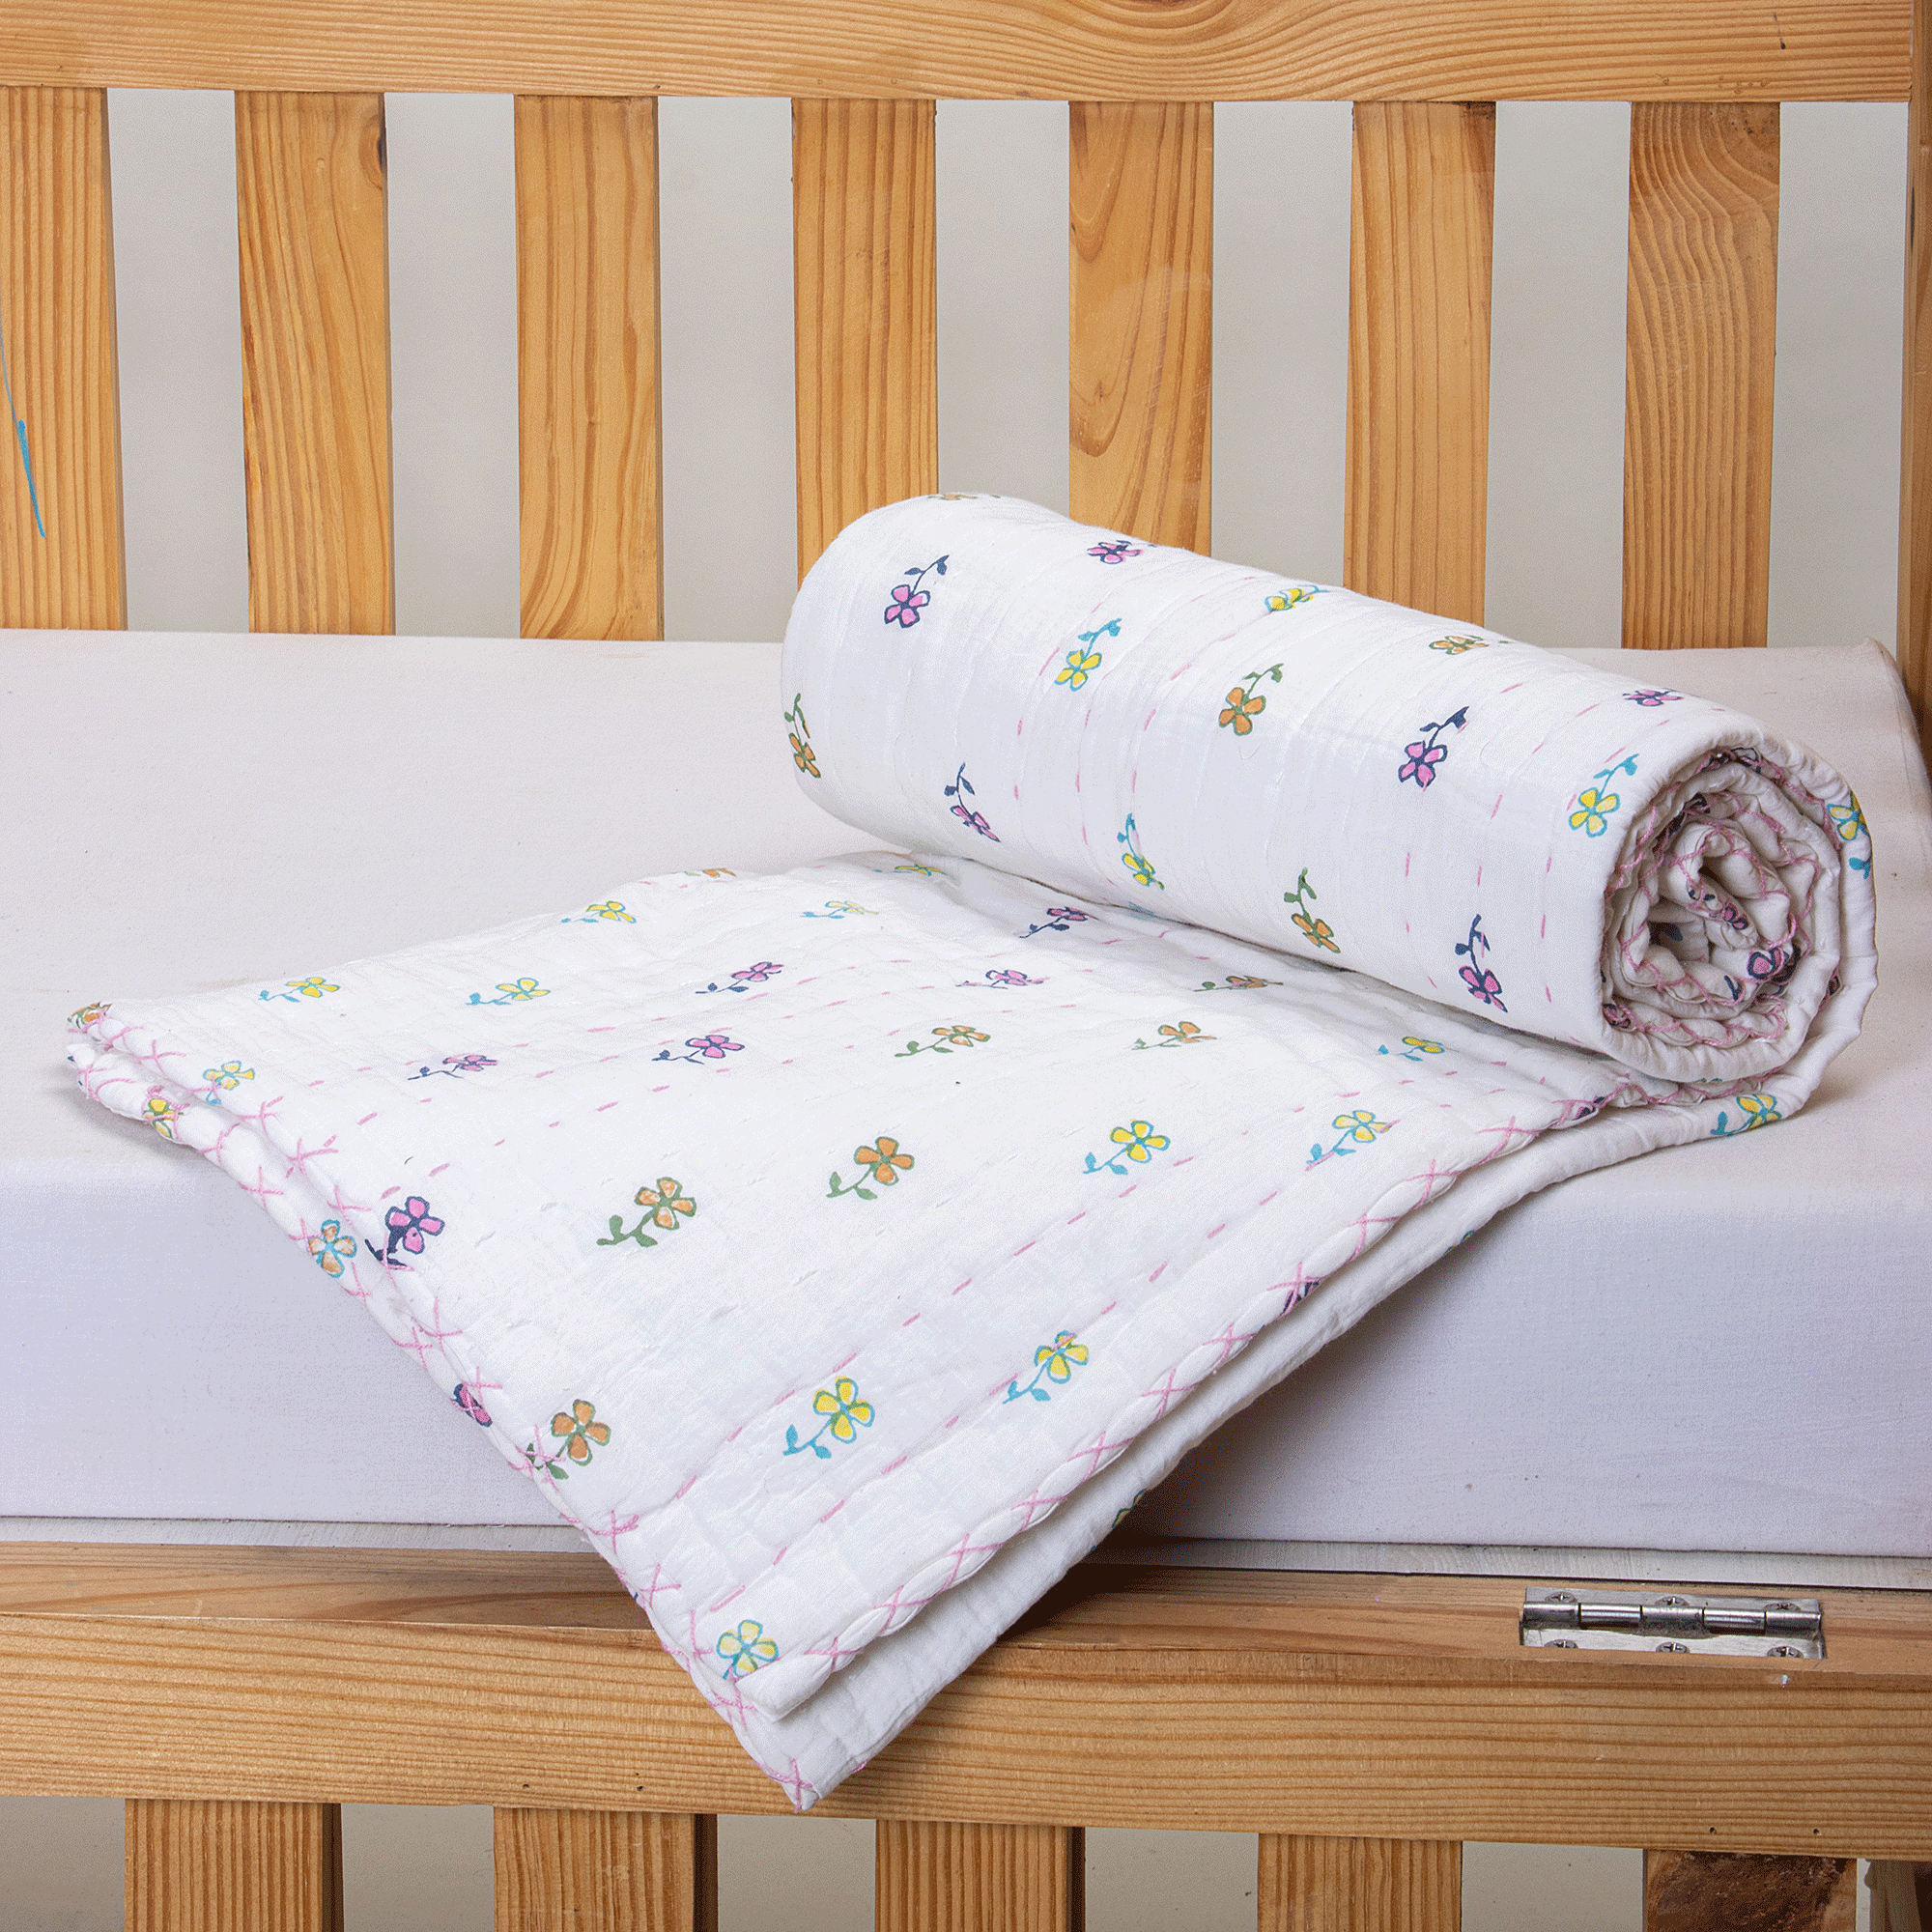 Floral Print Cotton Baby Blanket Set for Winter